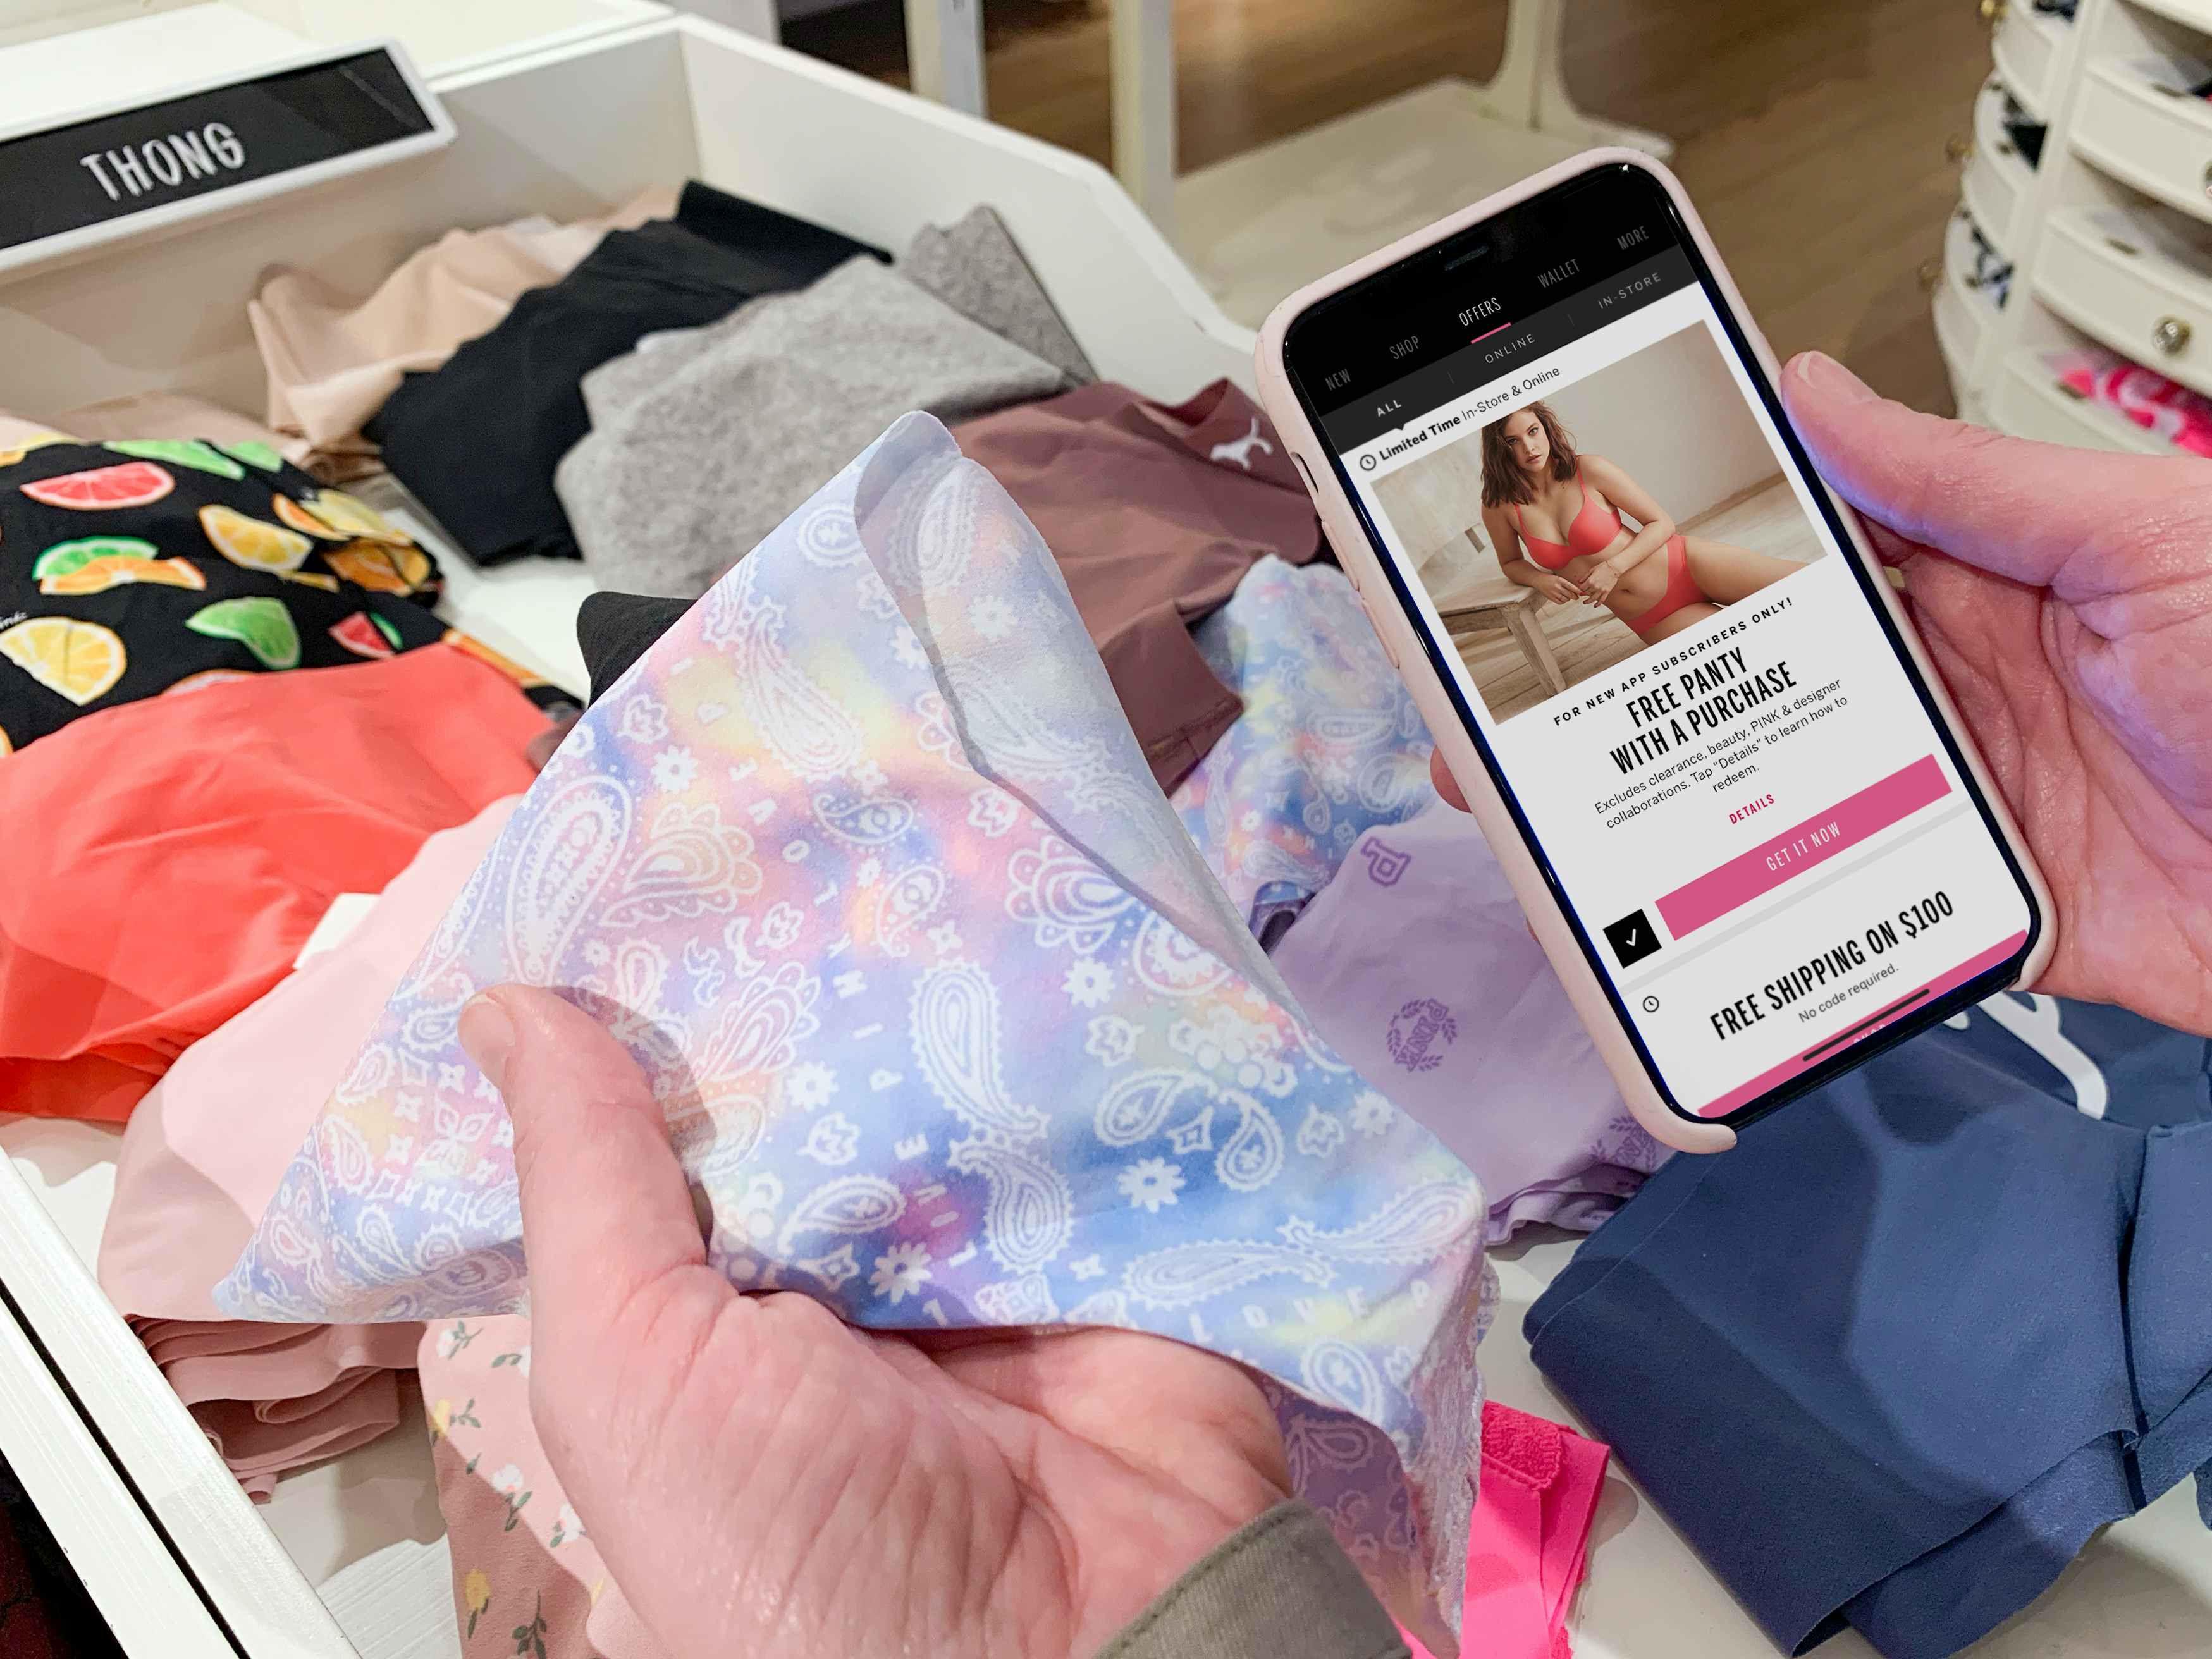 Woman holding phone with Free panty with purchase promo displayed on it, next to panties.